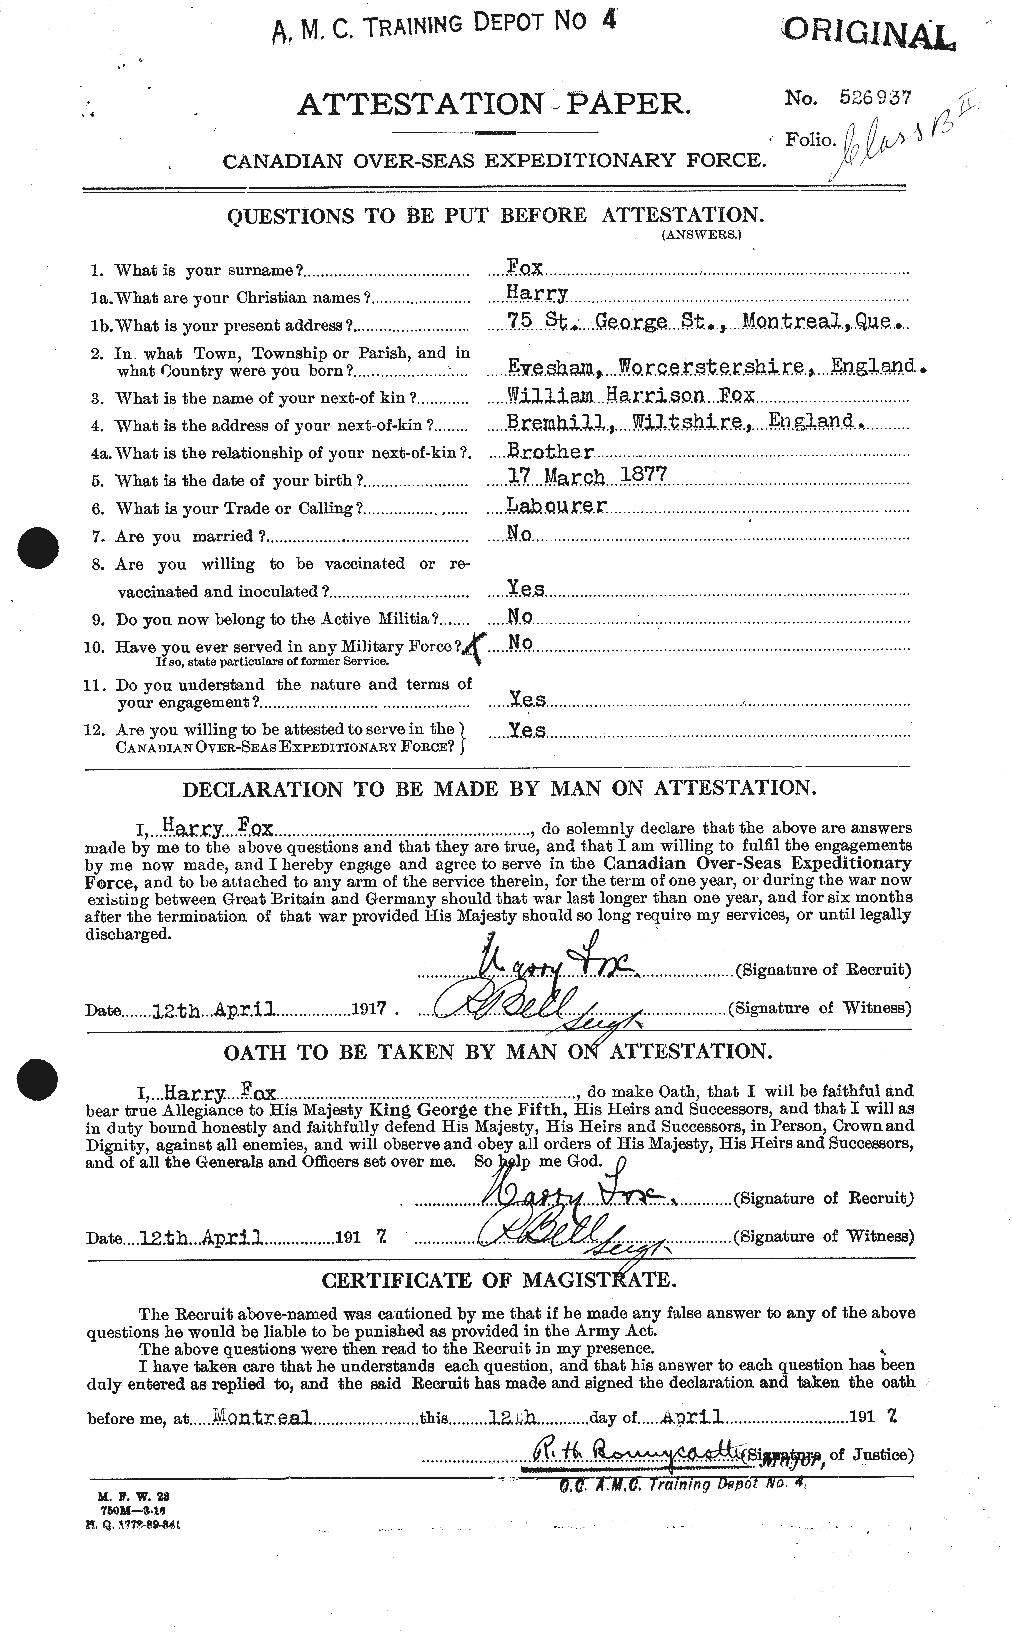 Personnel Records of the First World War - CEF 332509a